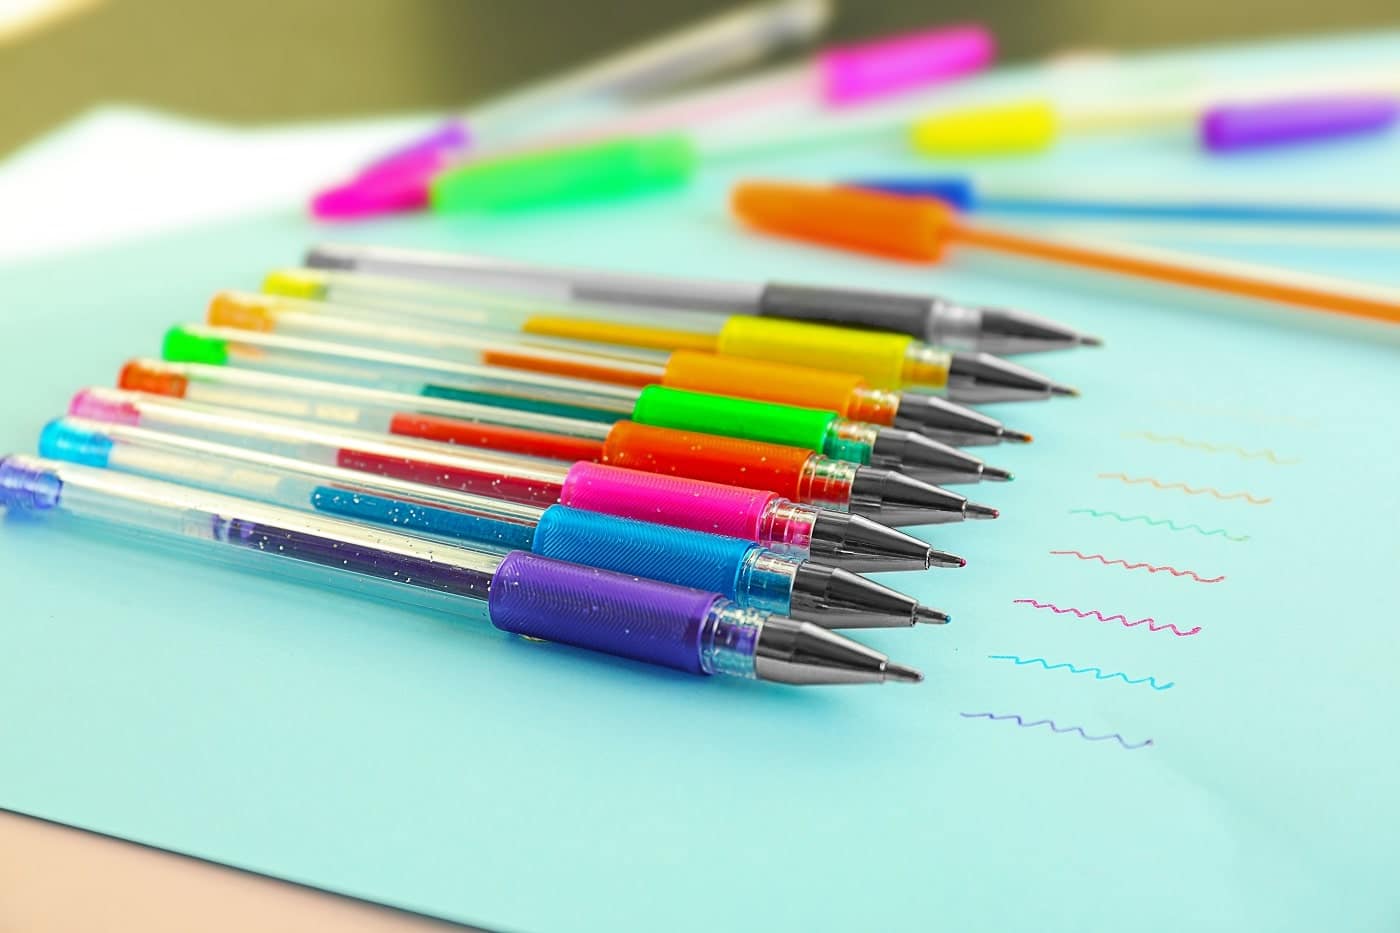 Red, Blue or Green: Which colour pen is best for marking? - Hope Blog